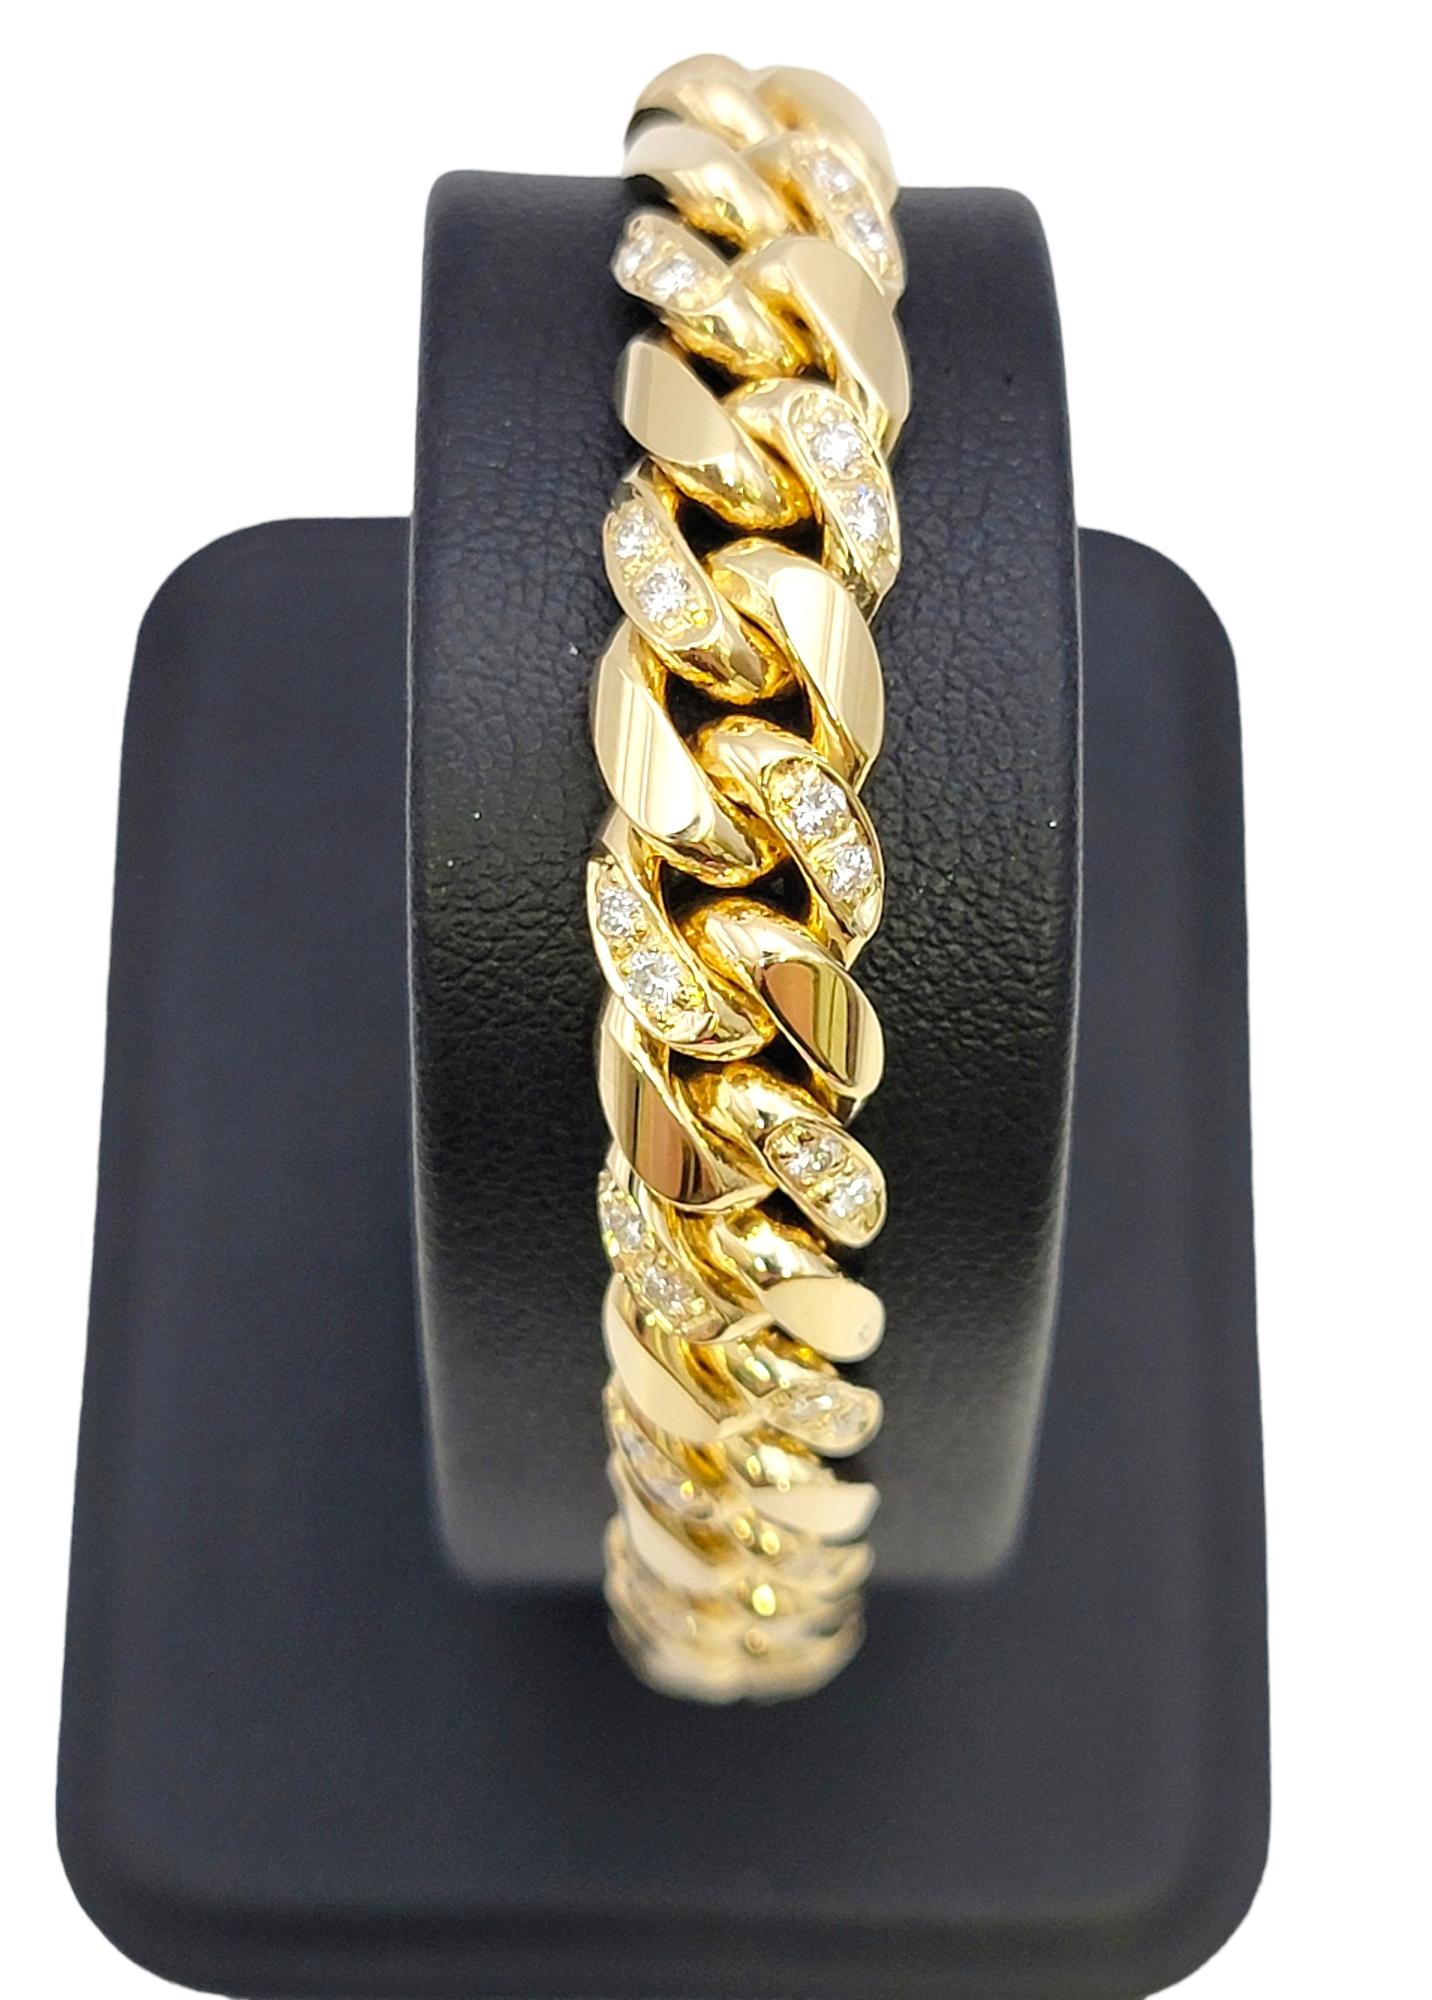 Unisex 14 Karat Yellow Gold Curb Link Bracelet with Pave Diamond Accents For Sale 6